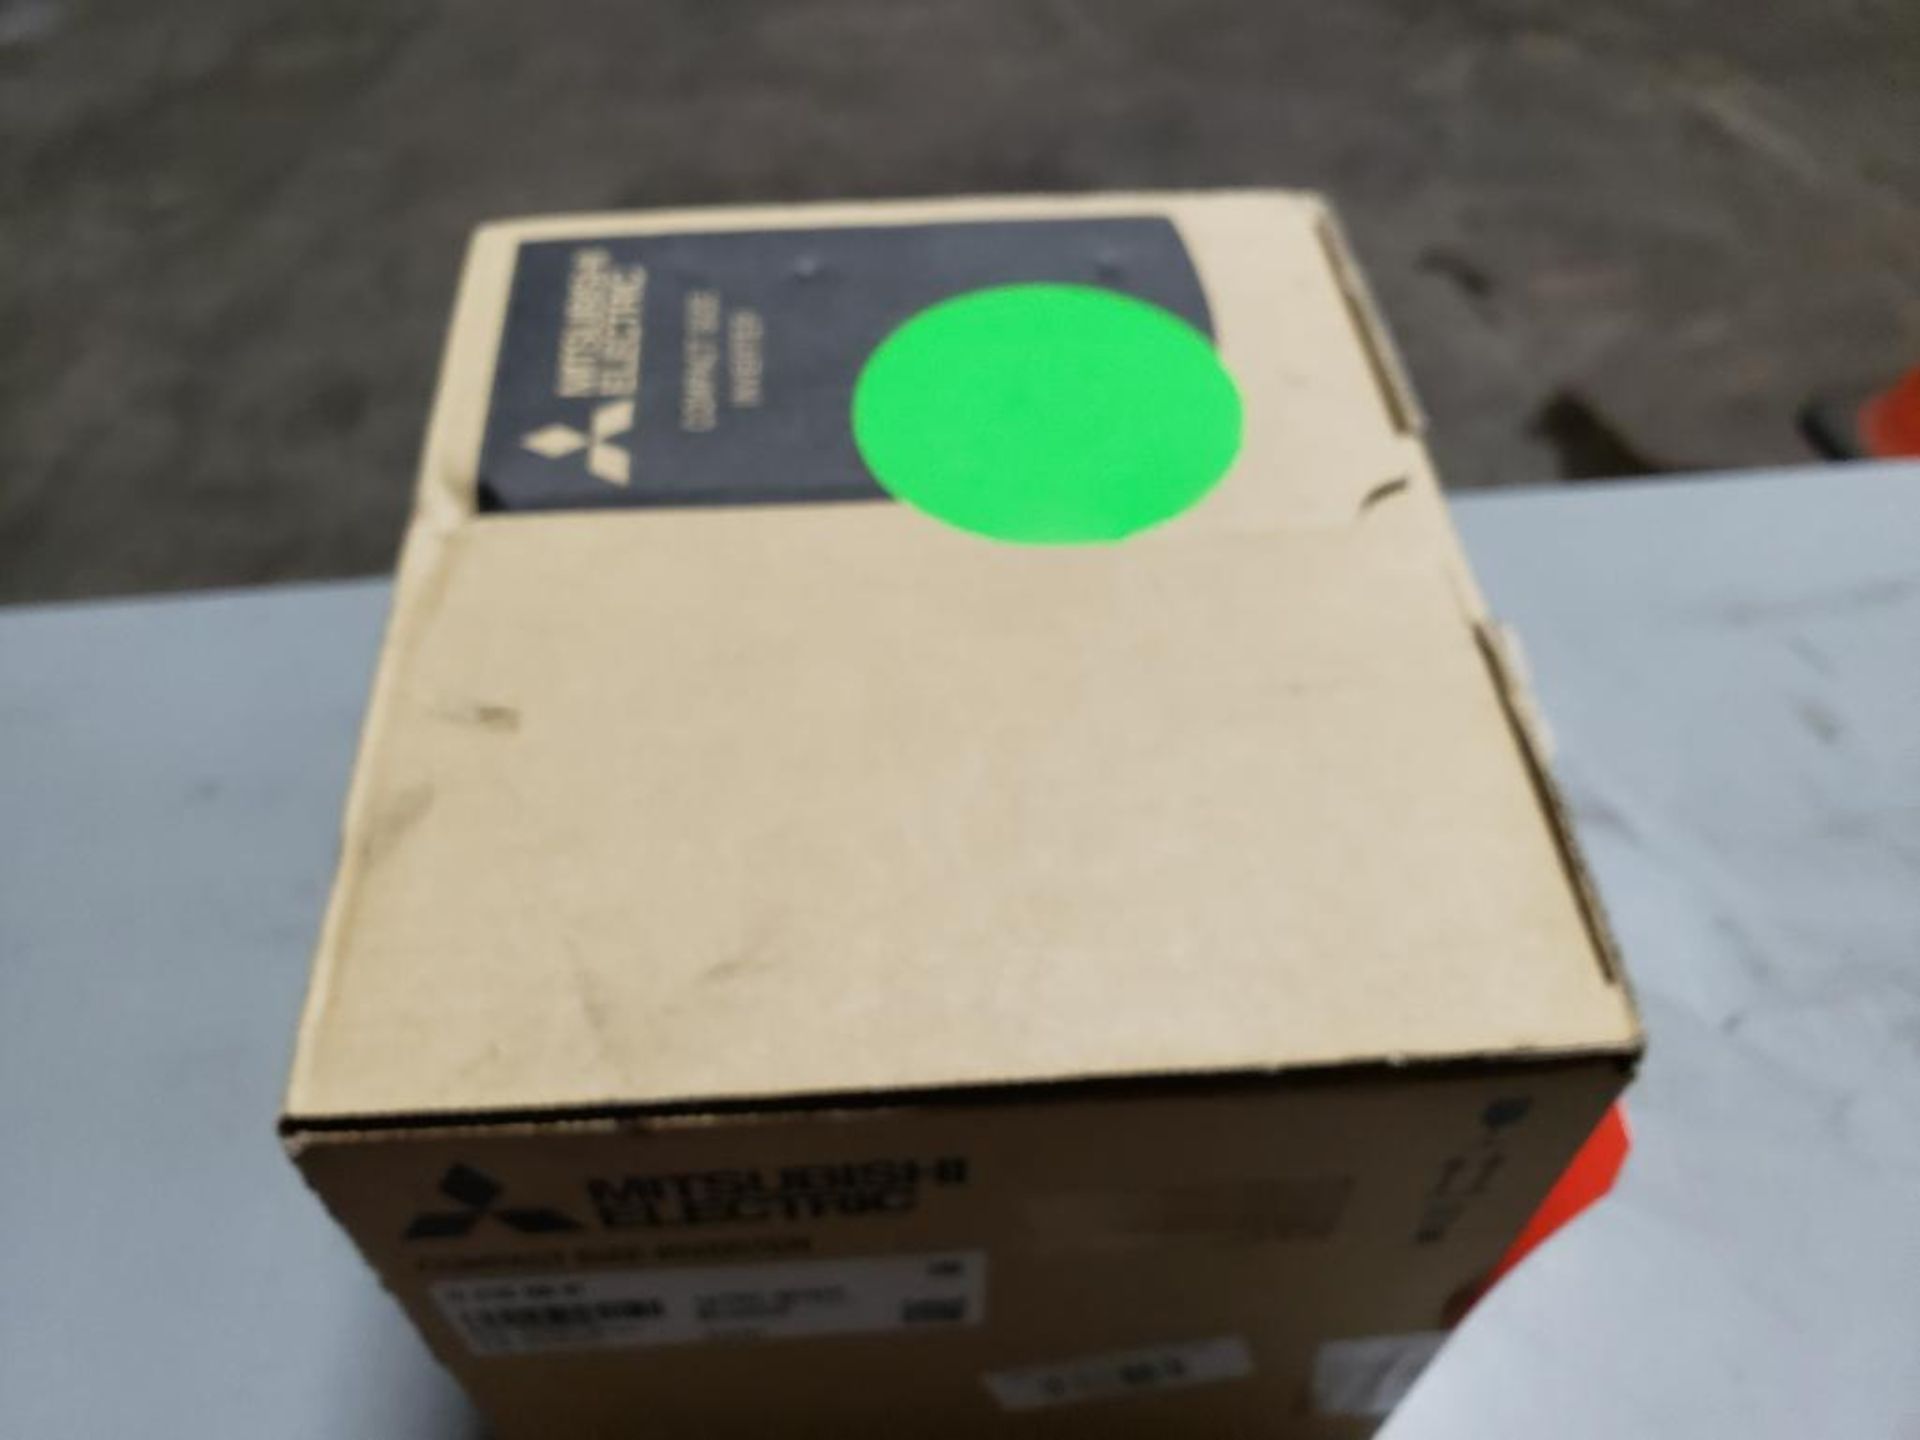 Mitsubishi inverter drive. Part number FR-D740-080-N7. New in box. - Image 7 of 7